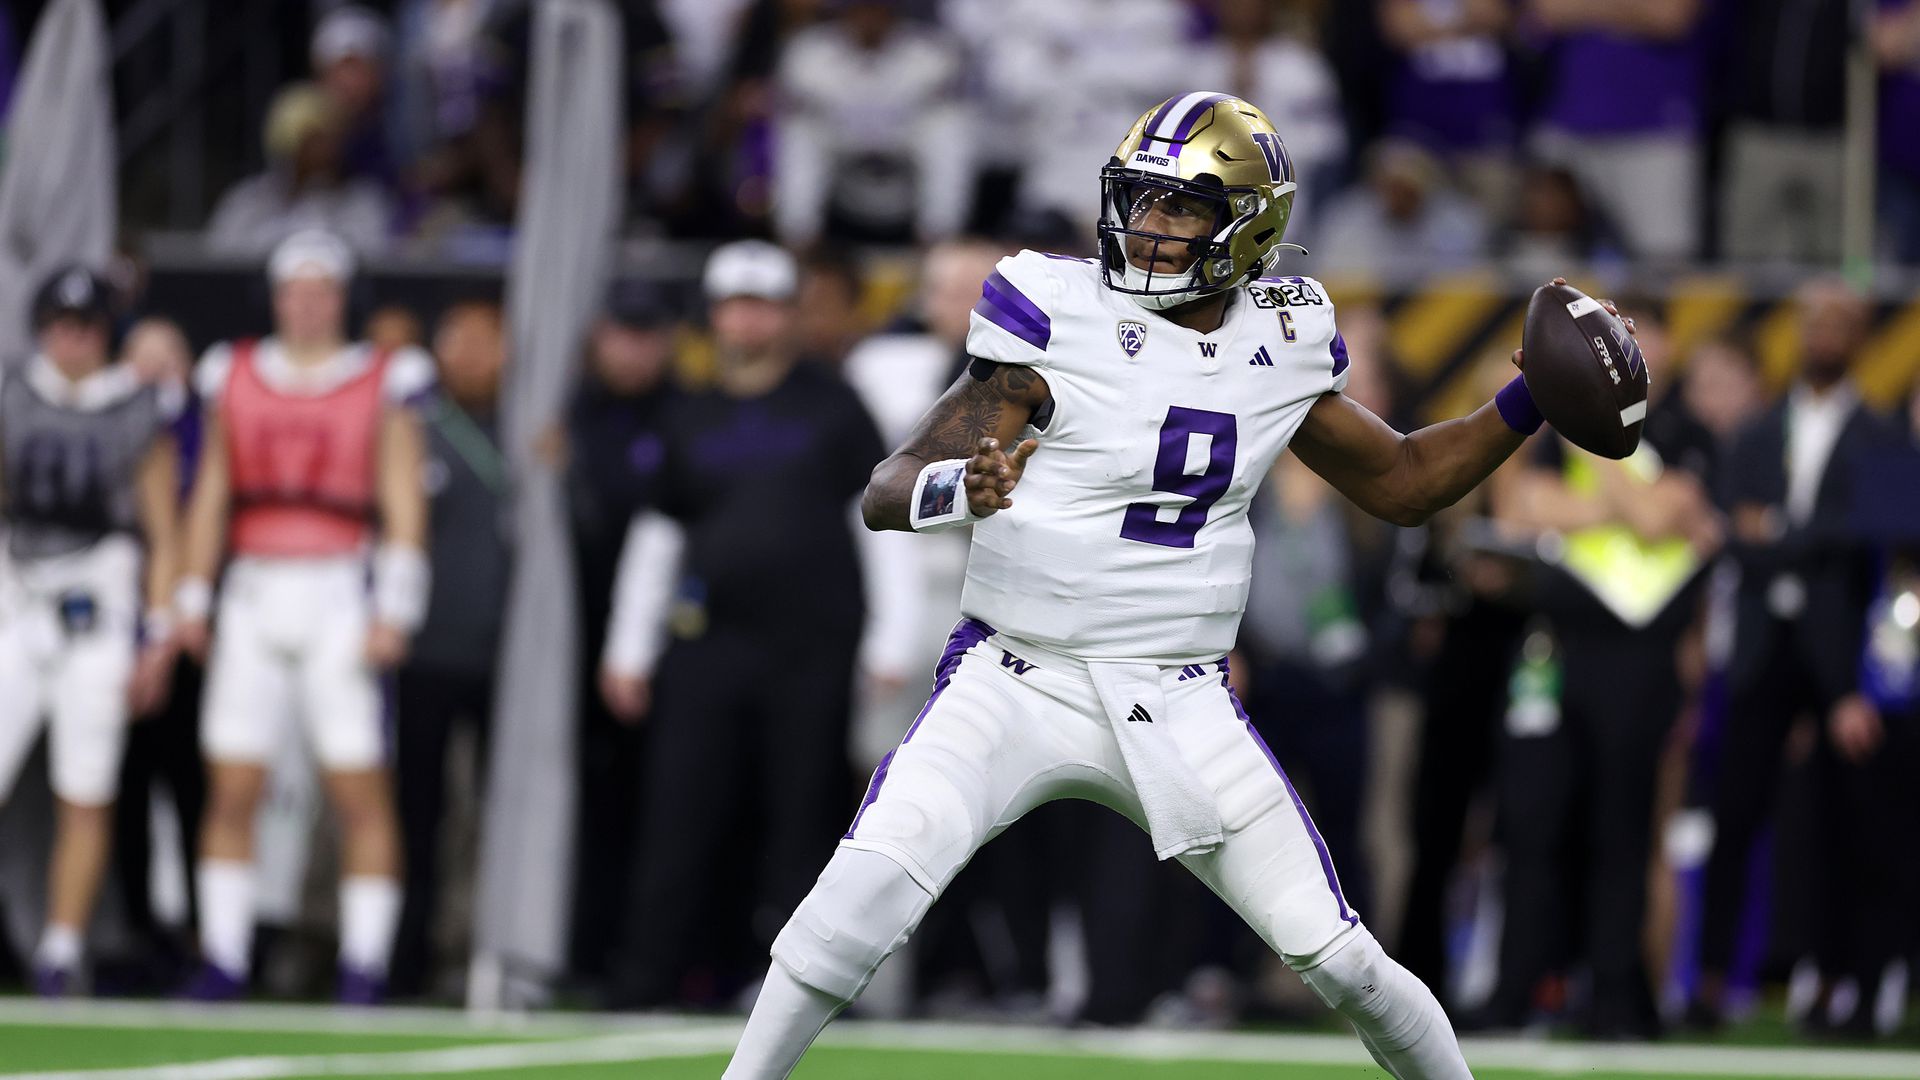 the open field: if the seahawks draft a quarterback, who do you want?